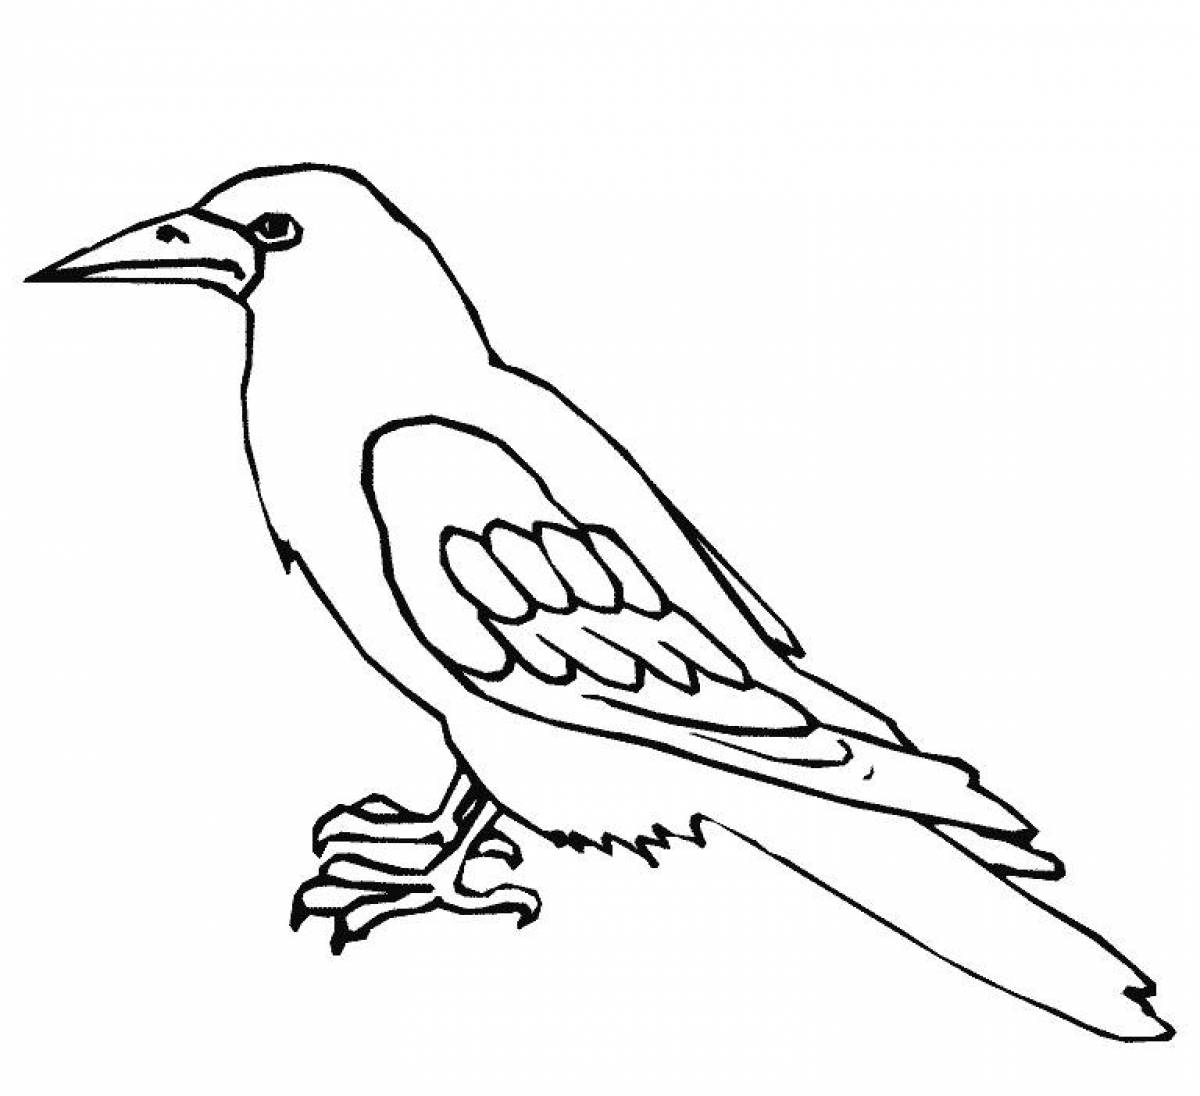 Adorable crow coloring book for kids